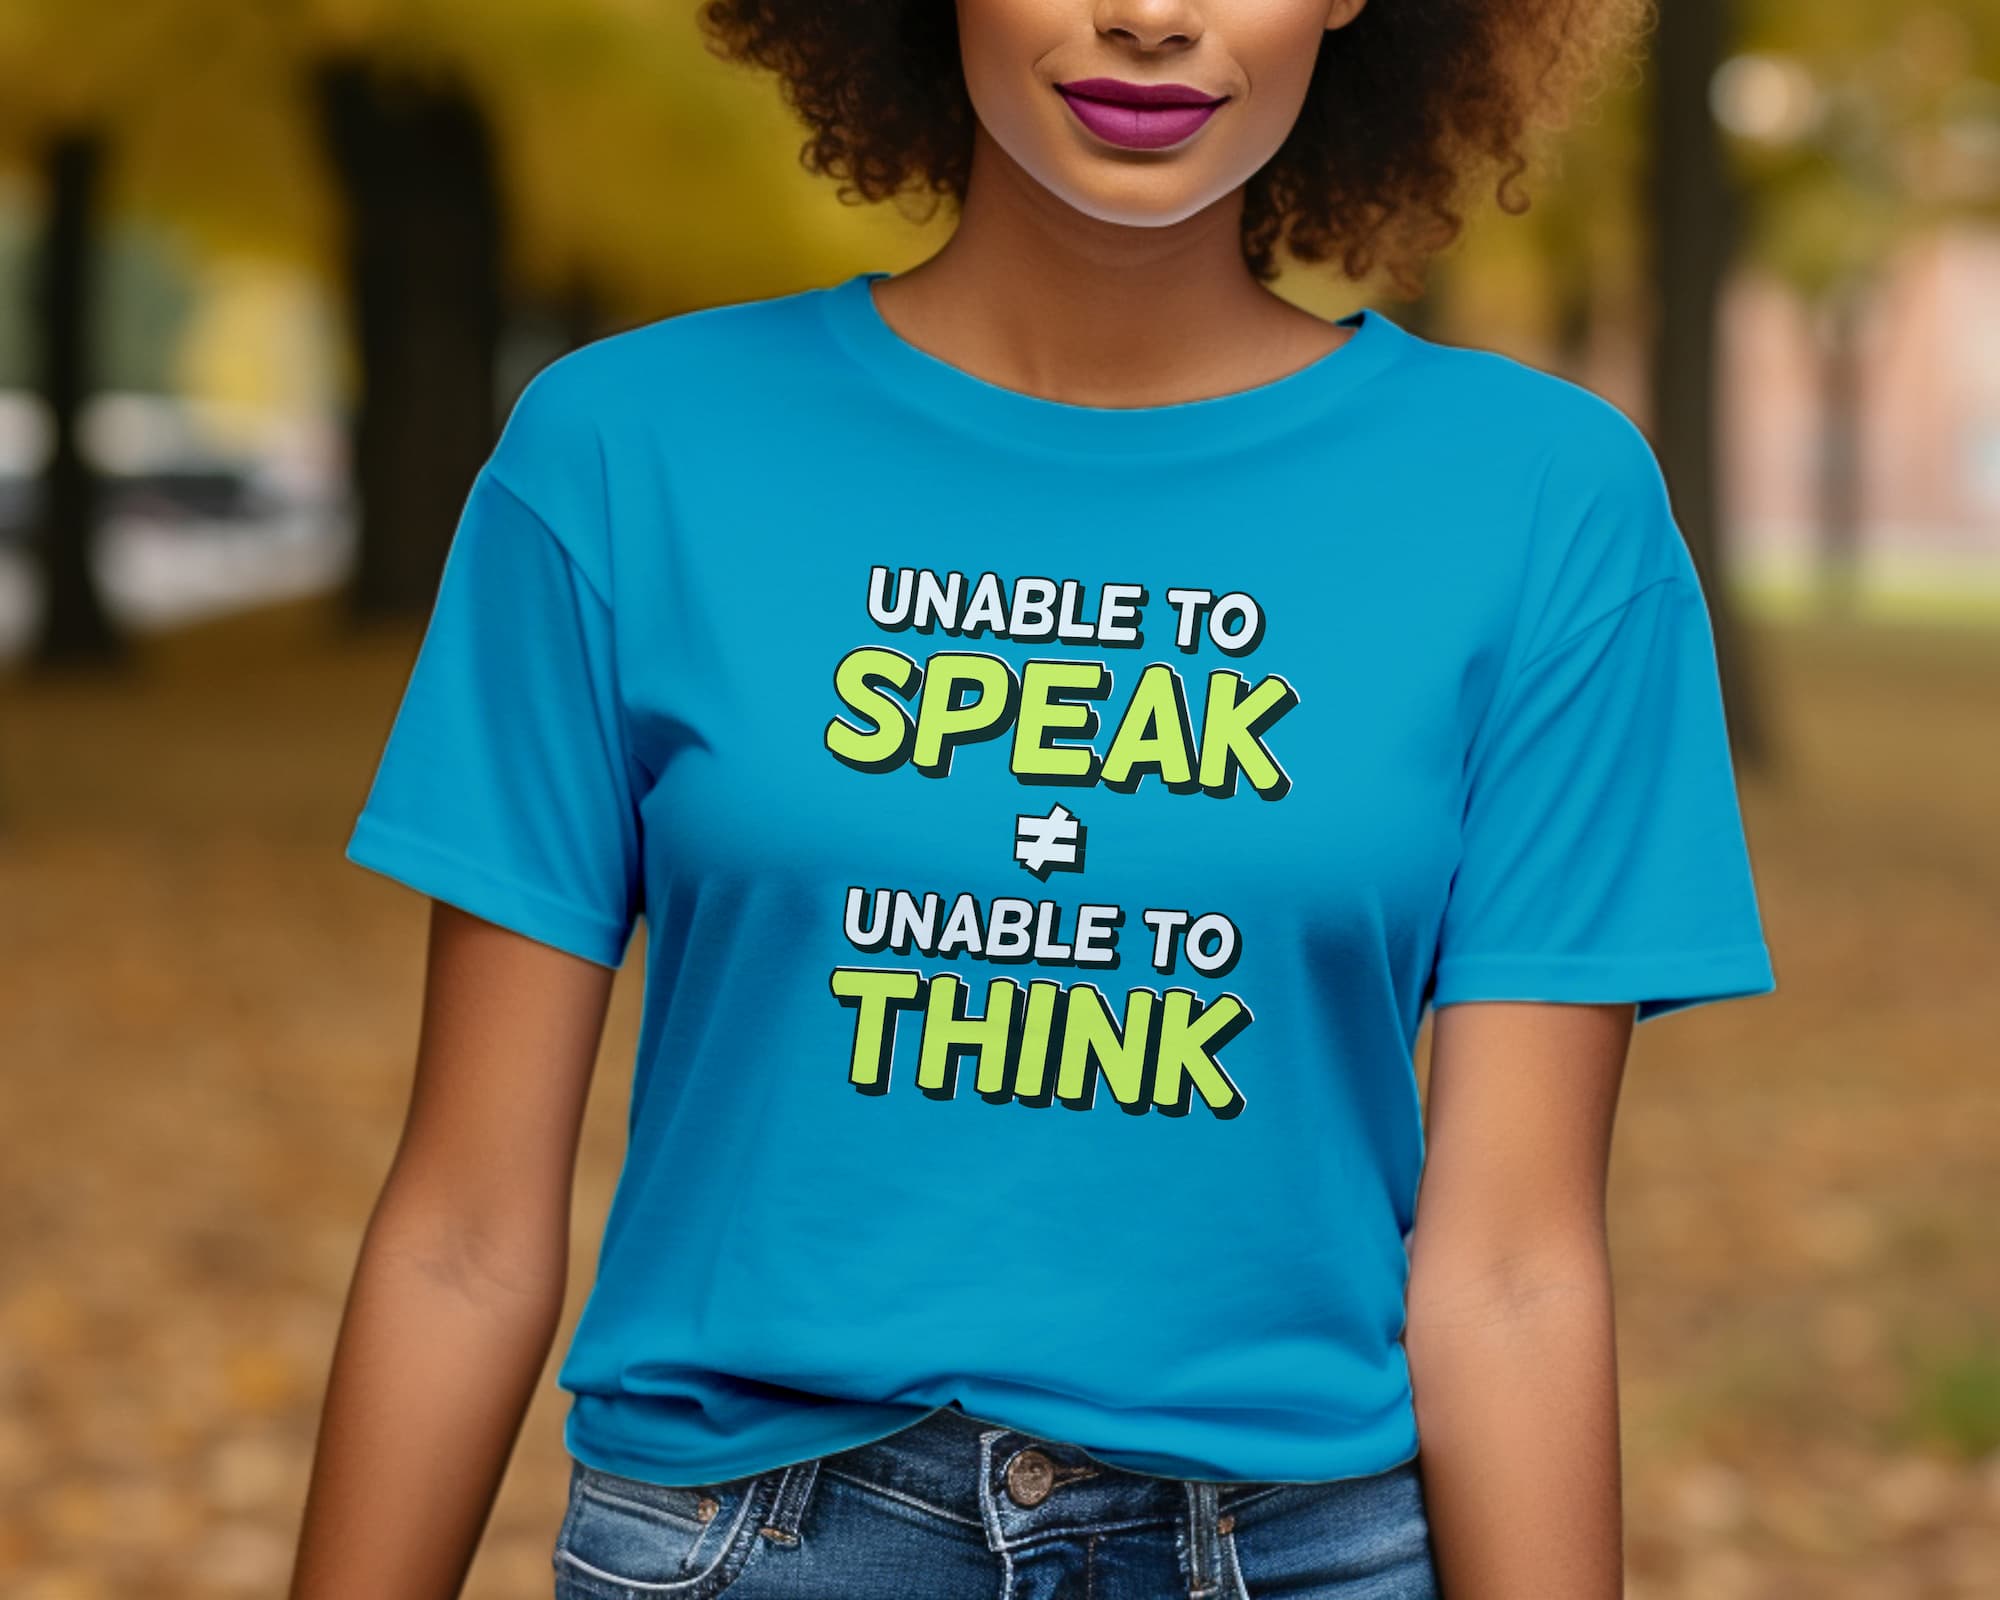 Unable to Speak ≠ Unable to Think t-shirt